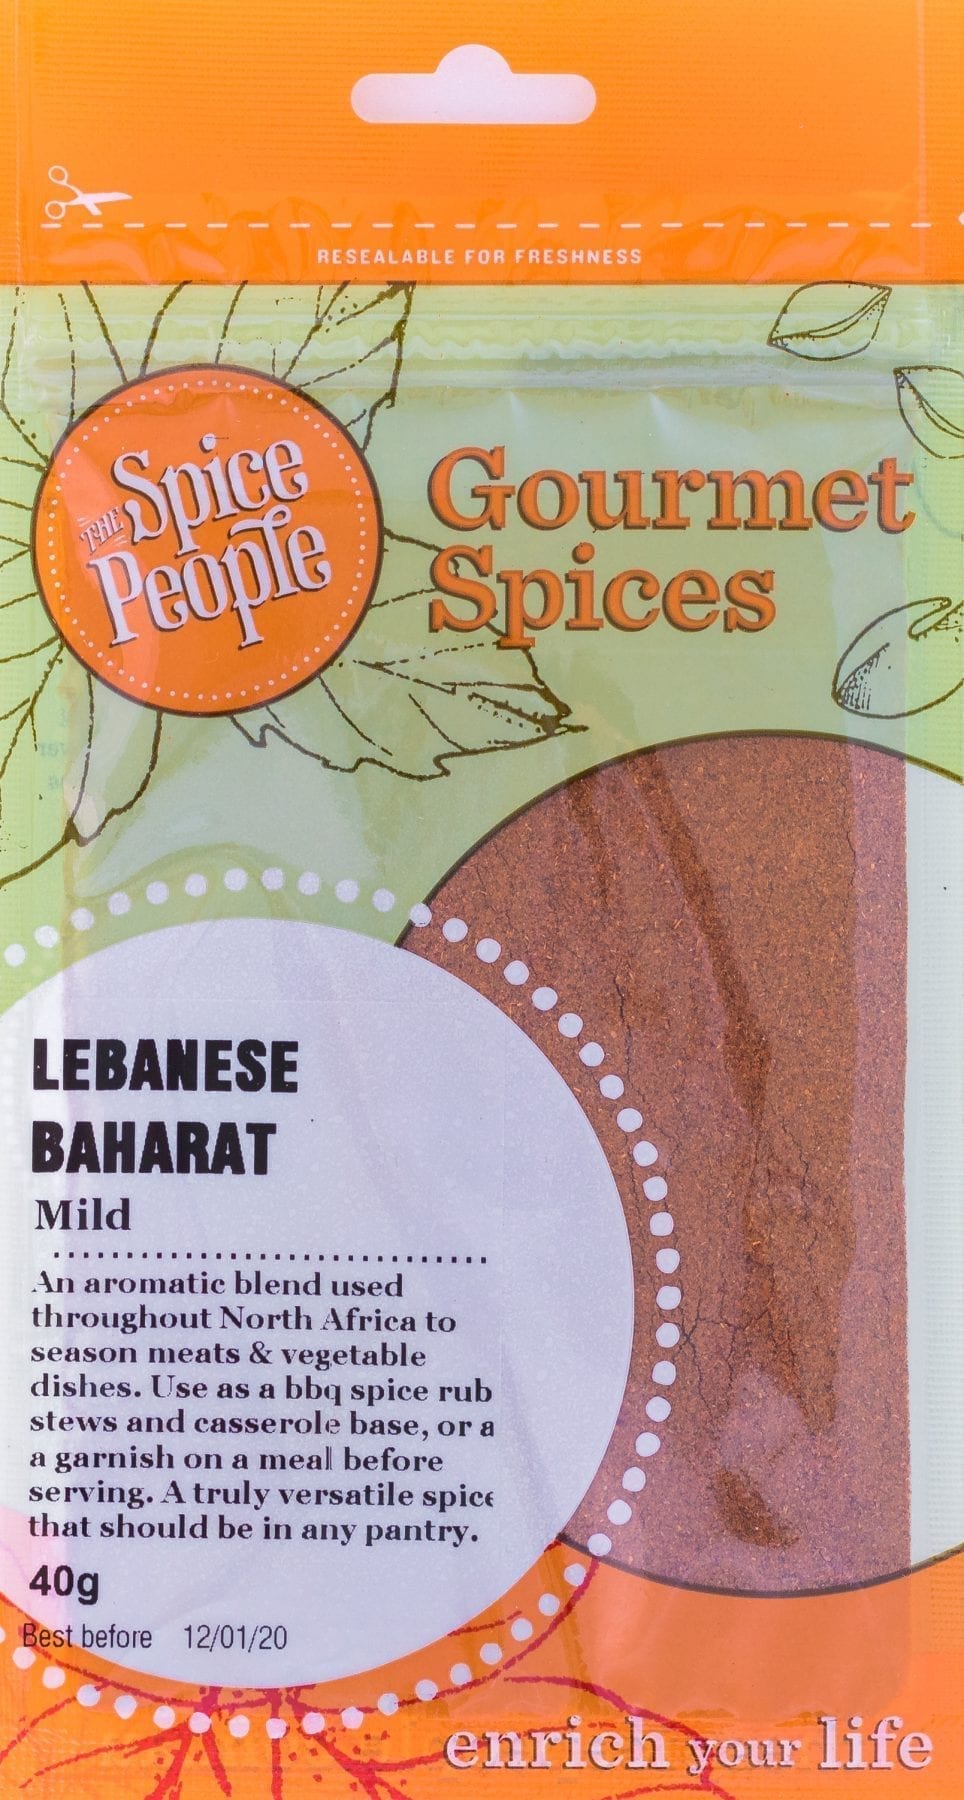 The Spice People Lebanese Baharat